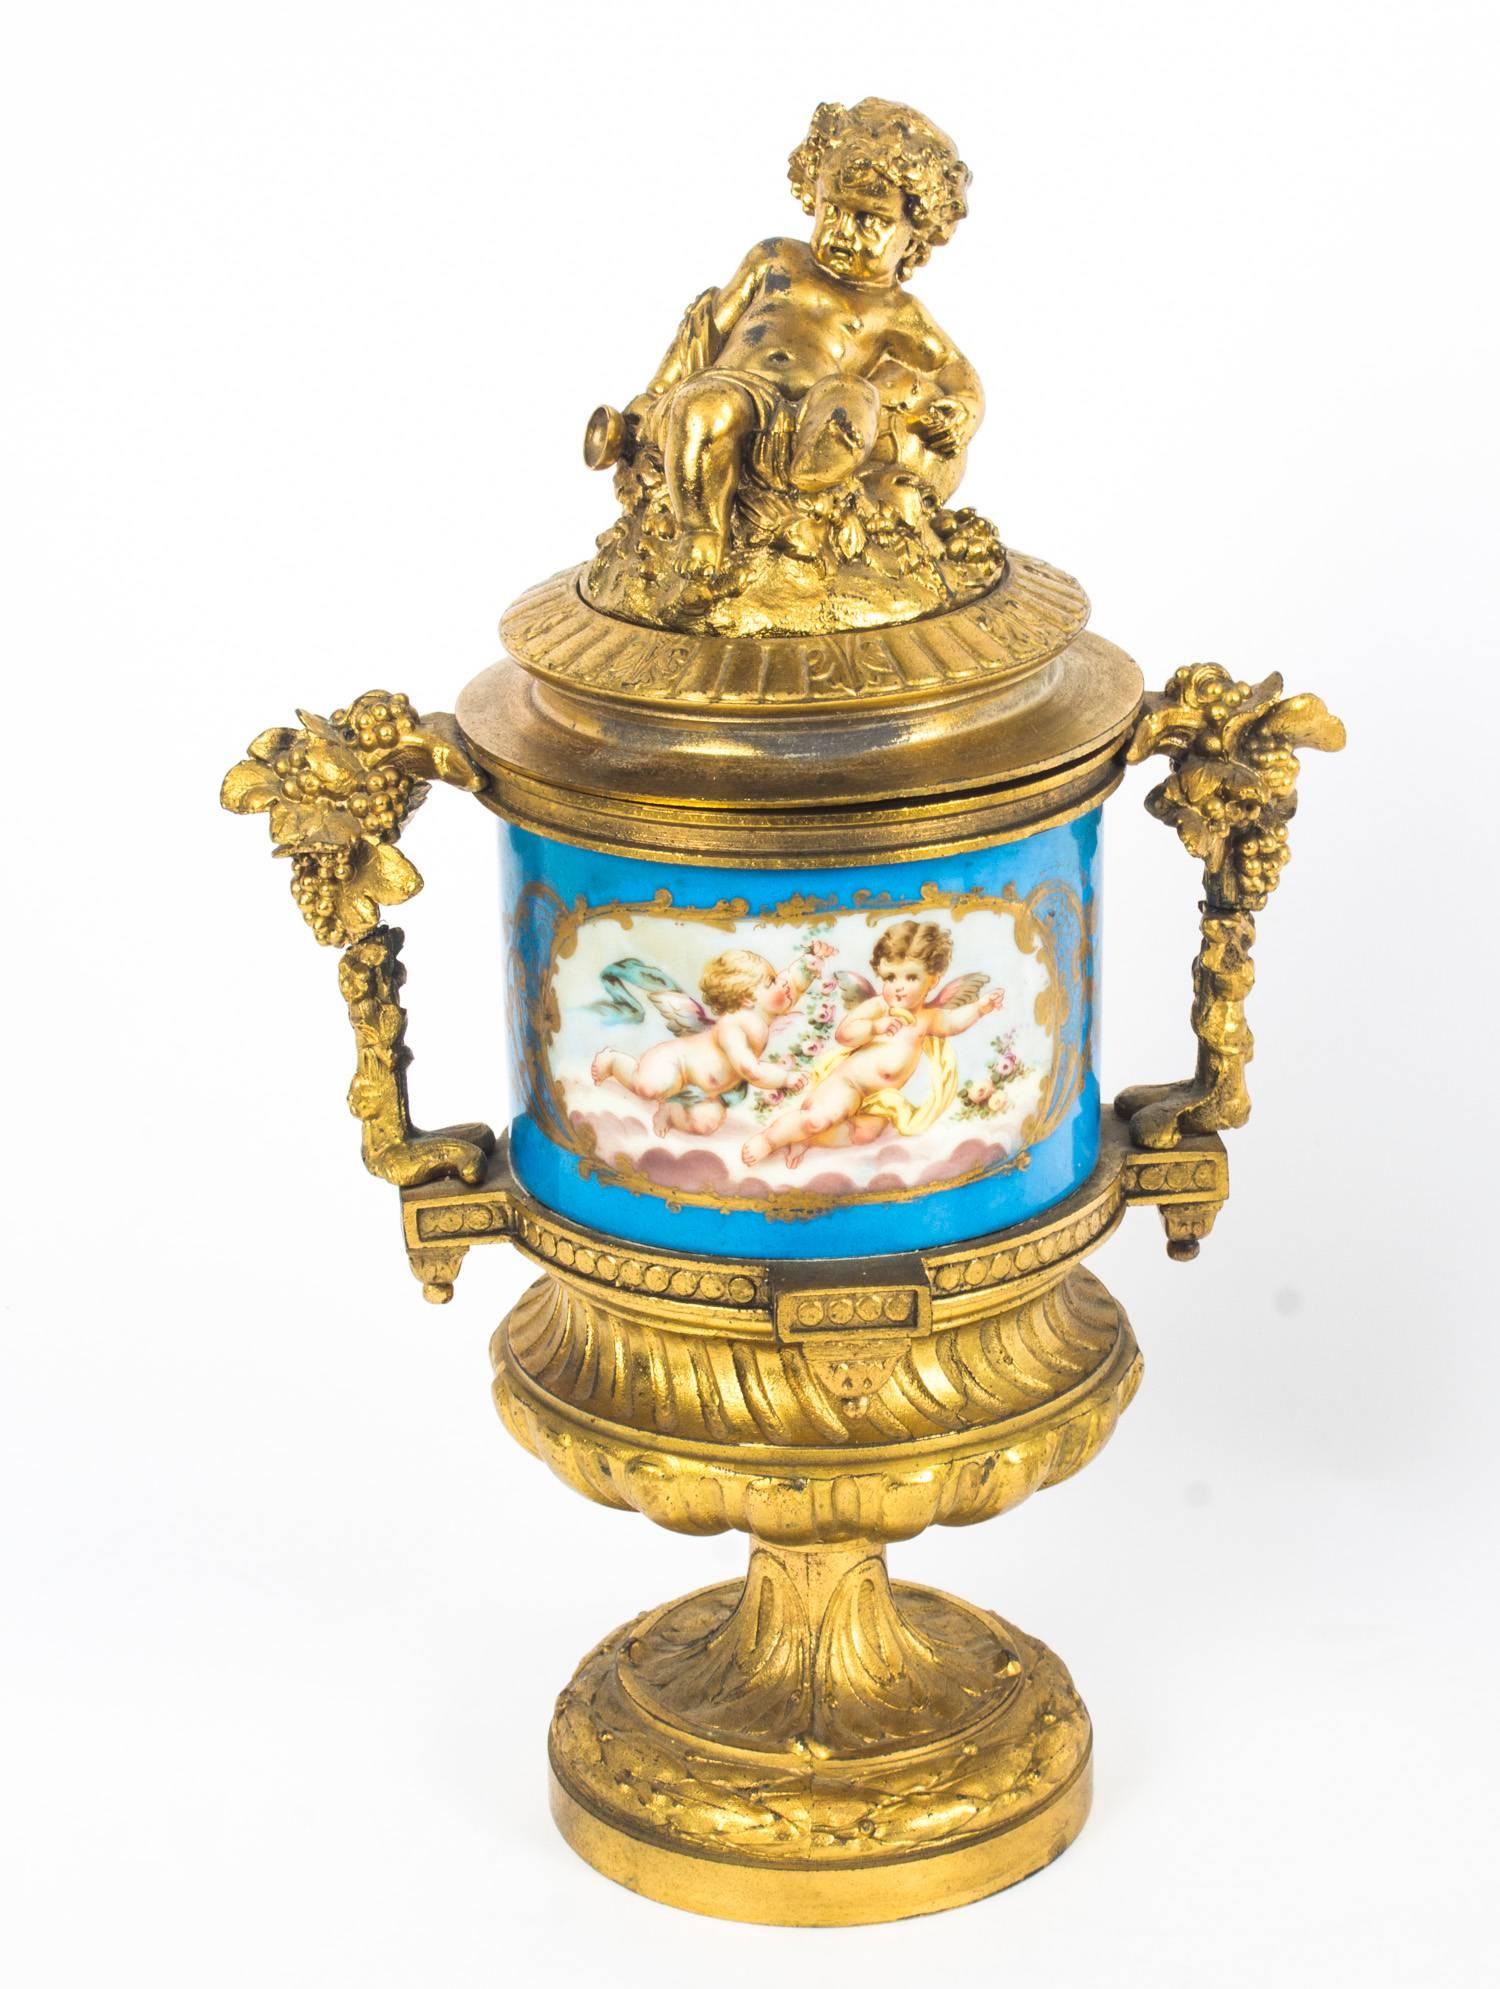 This is a stunning pair of French twin handle ormolu garniture lidded urns, with Sevres hand painted porcelain, in the manner of PH Mourey, circa 1870 in date.

The ormolu handles with grape vine decoration and the ormolu lids with seated cherubs.